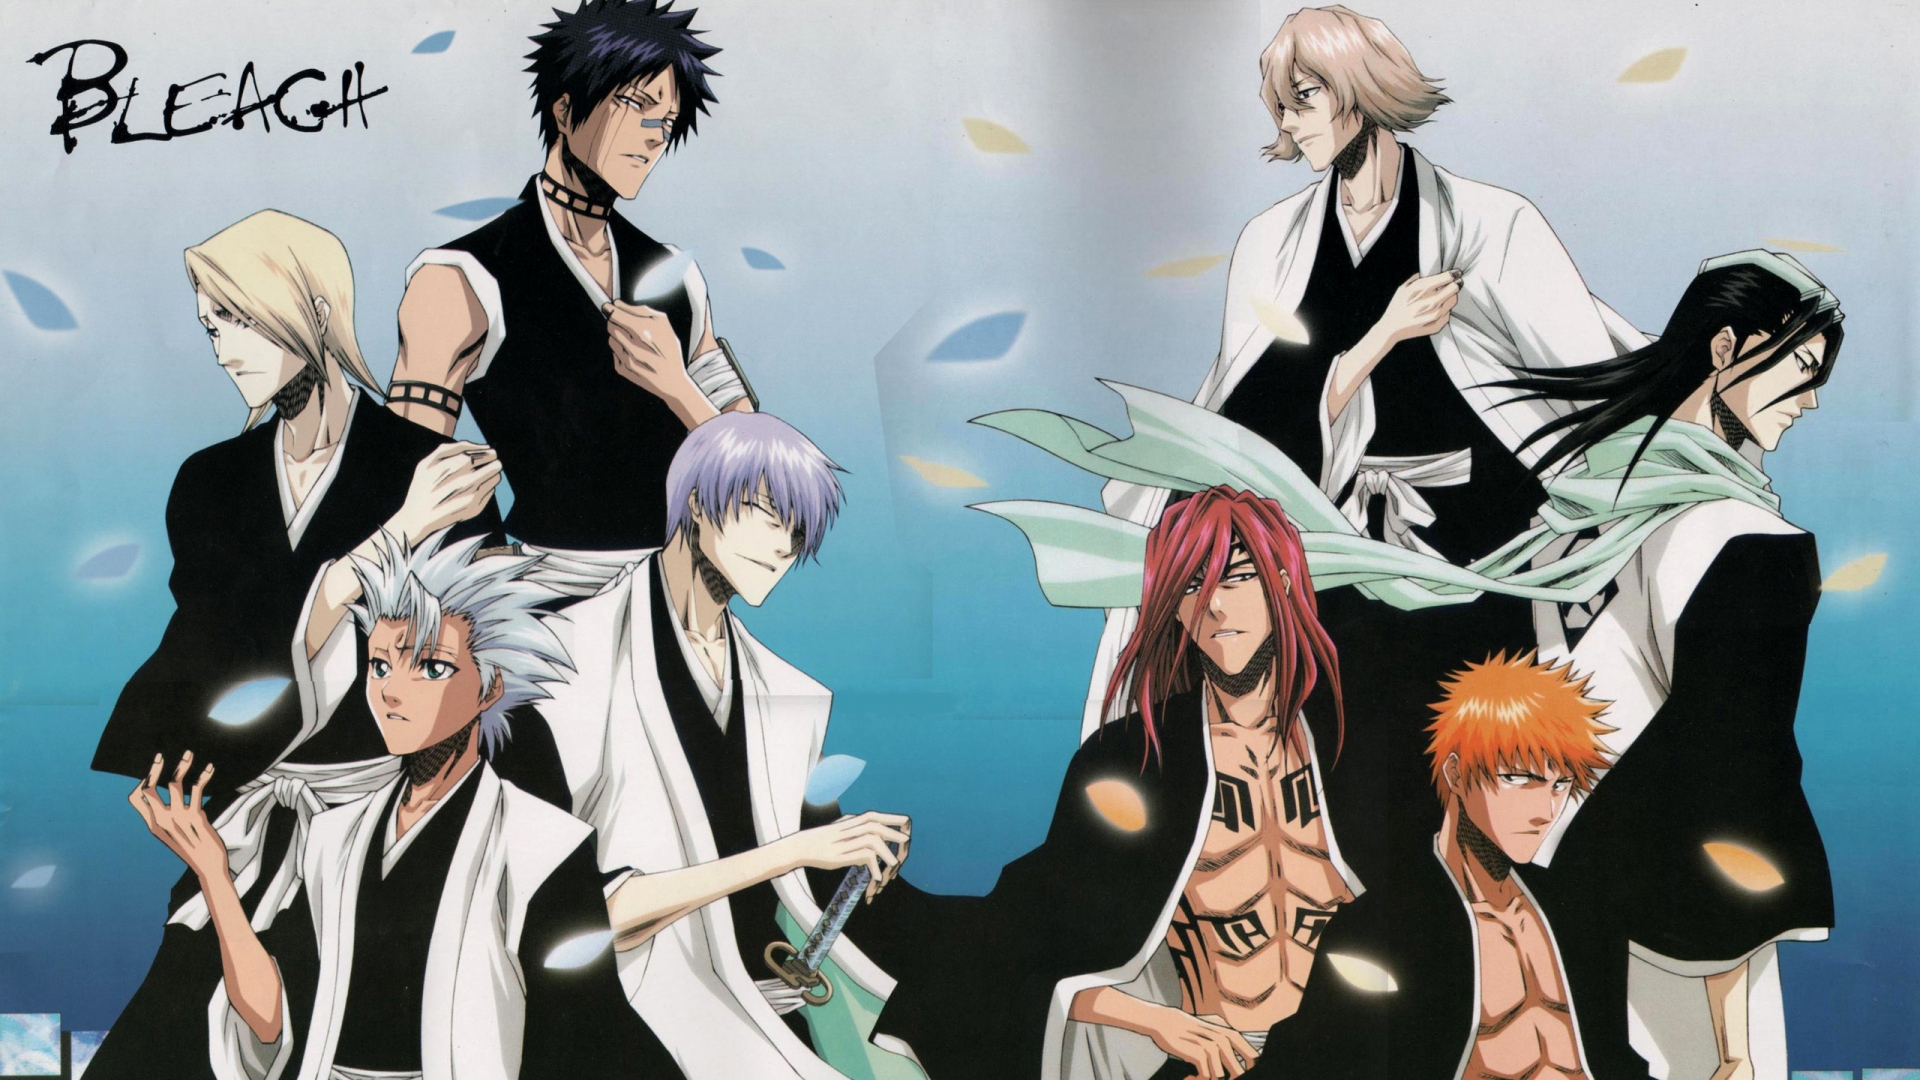 Bleach Anime Characters for 1920 x 1080 HDTV 1080p resolution